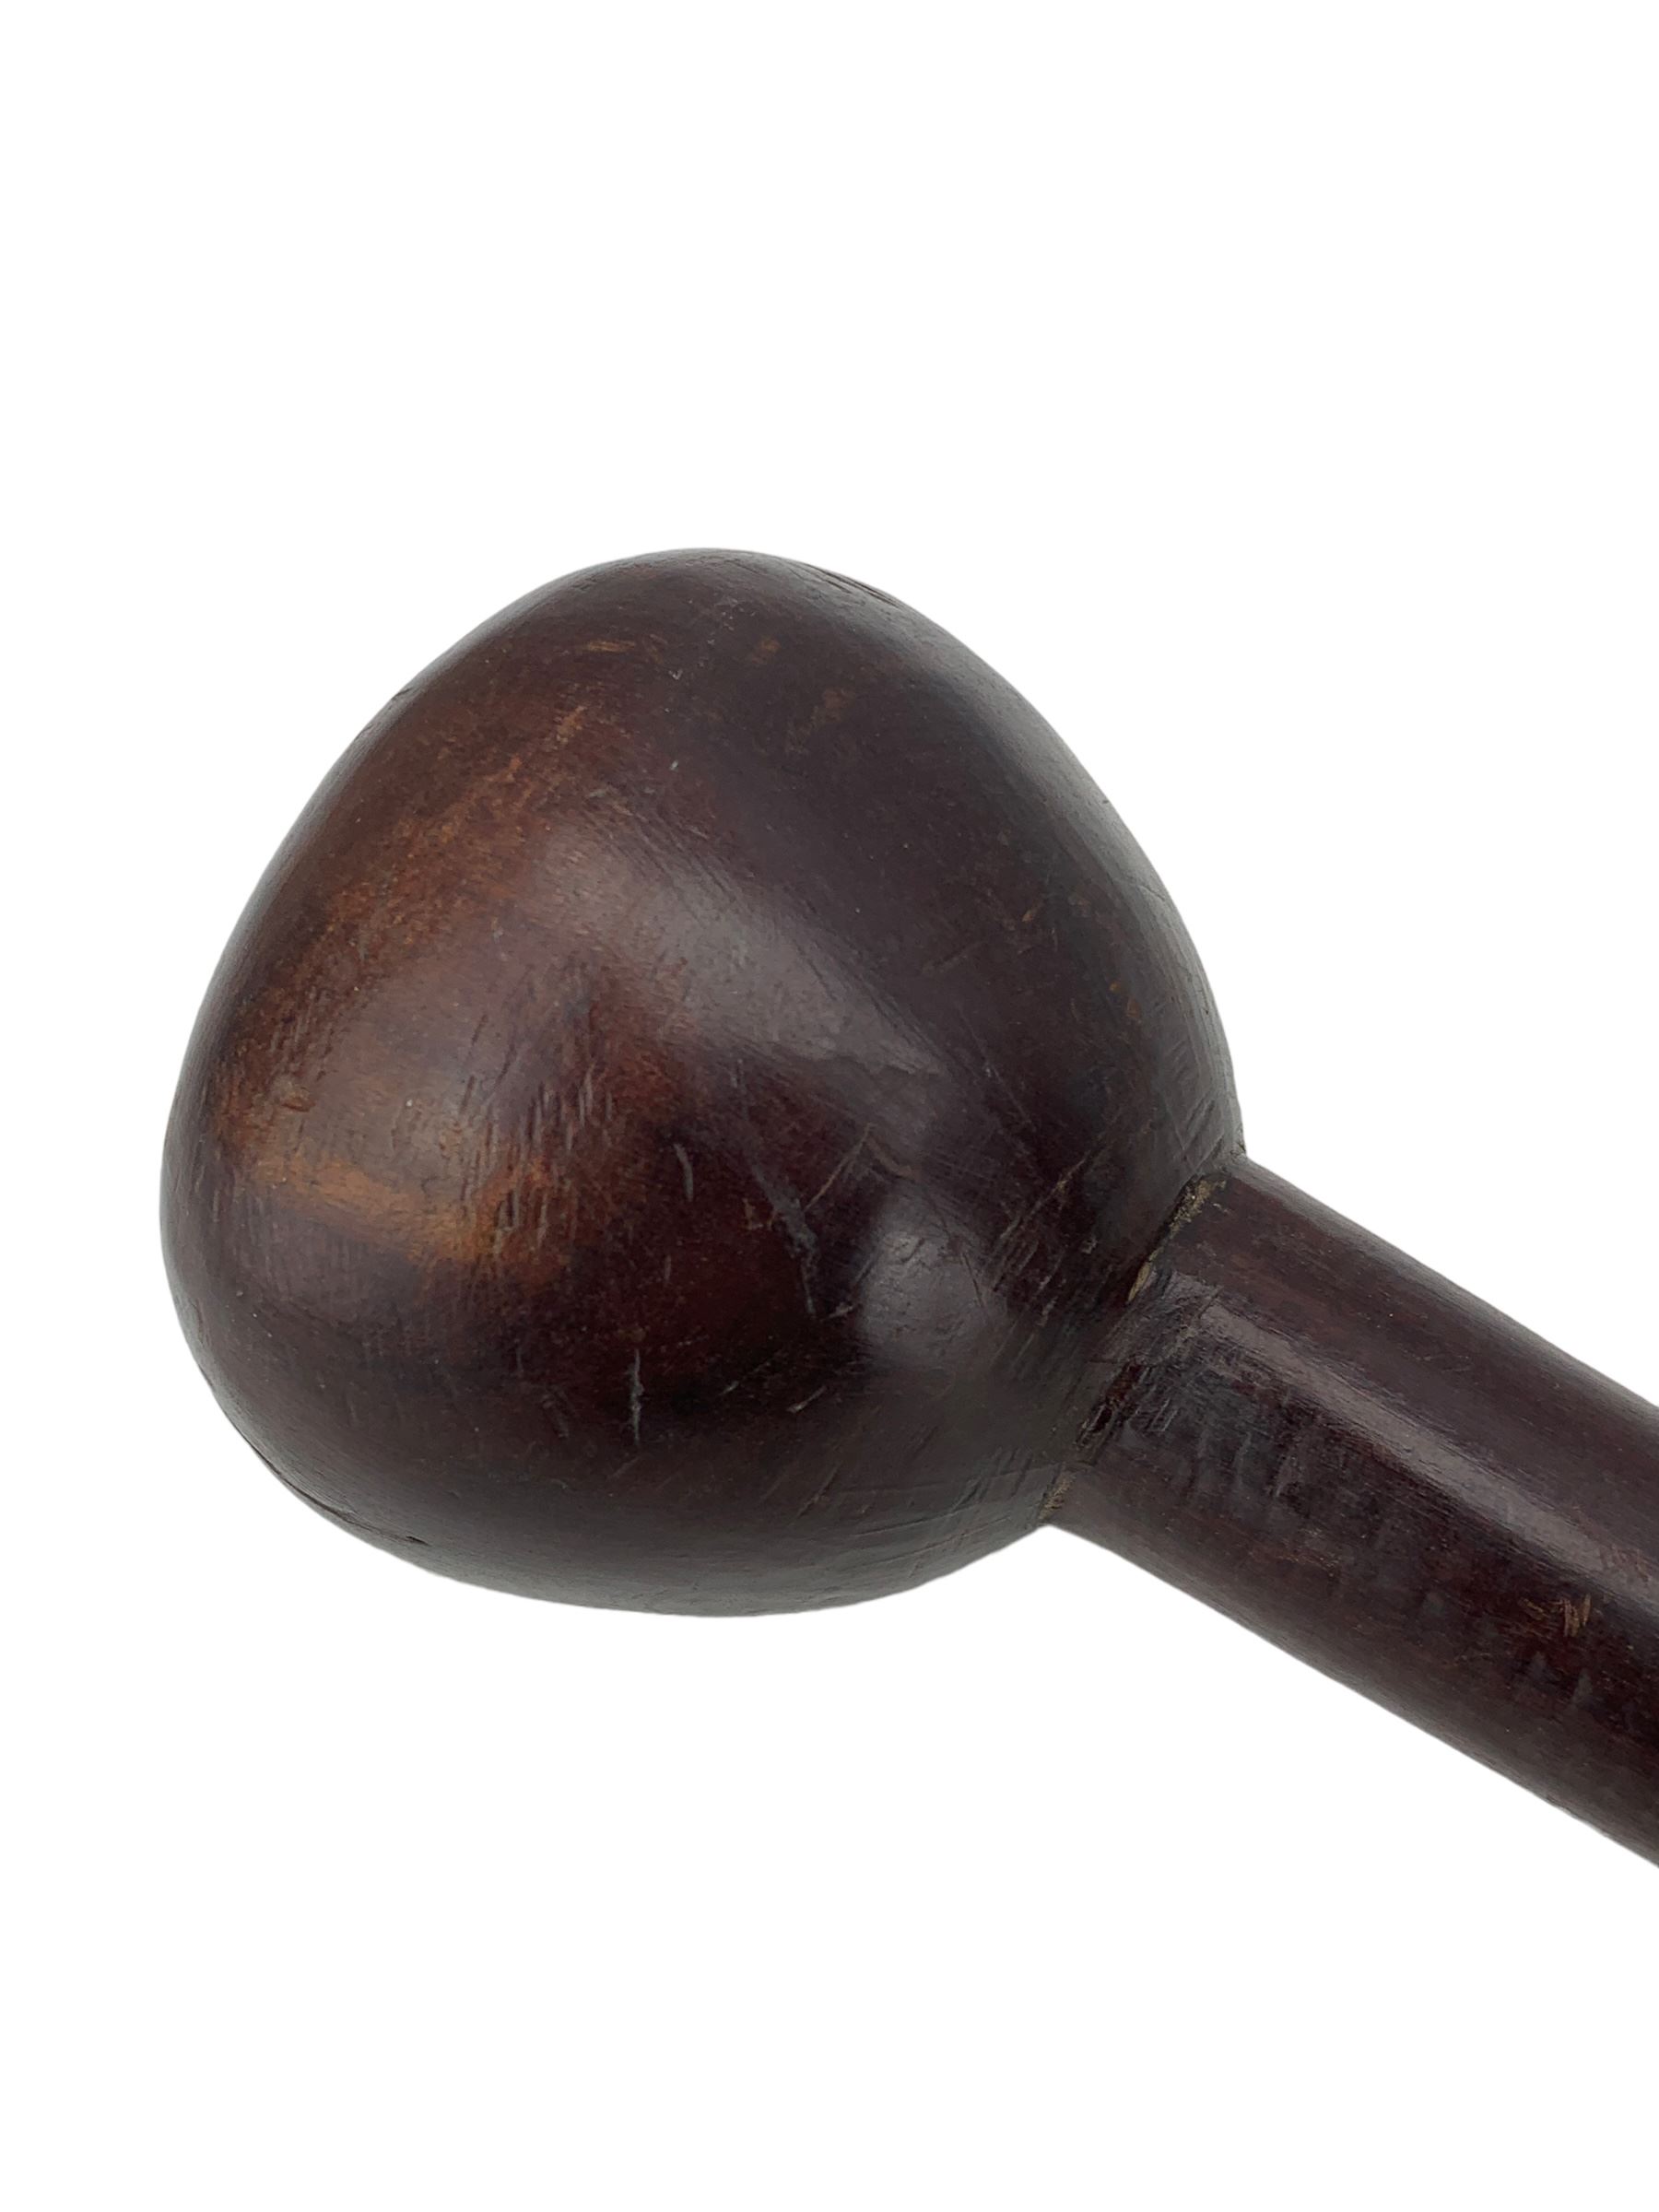 19th century Zulu knobkerrie with plain tapering shaft L80cm - Image 2 of 2